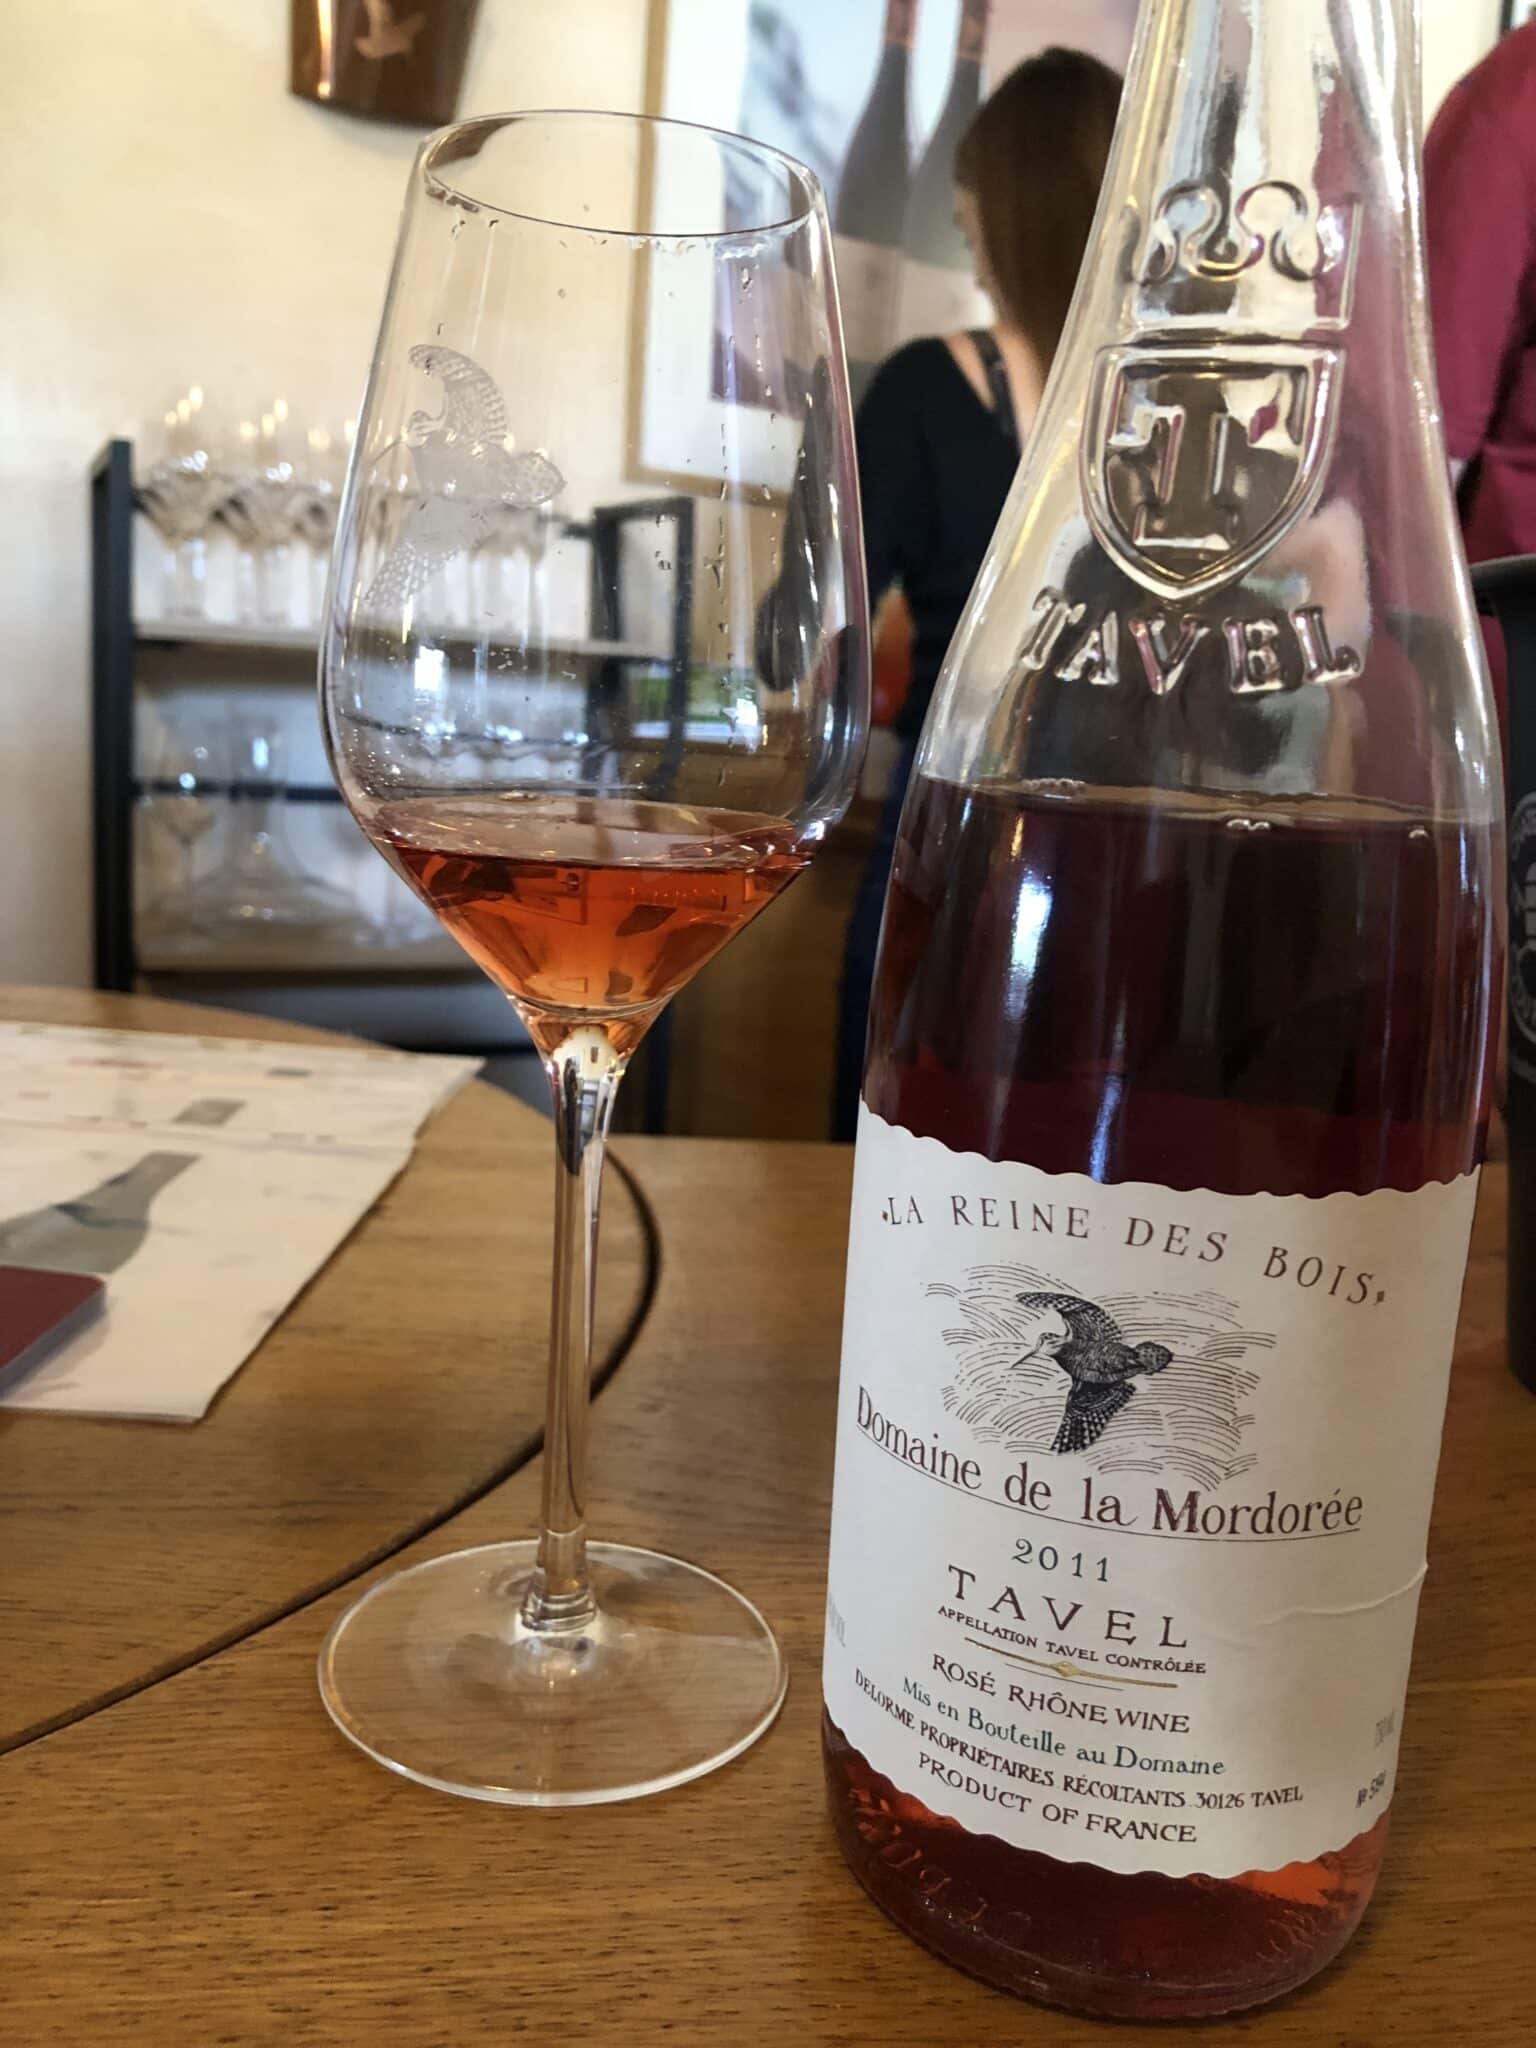 Tavel rosé is known for its distinctive terroir and intense ruby color, it’s one of the only rosés that ages well.